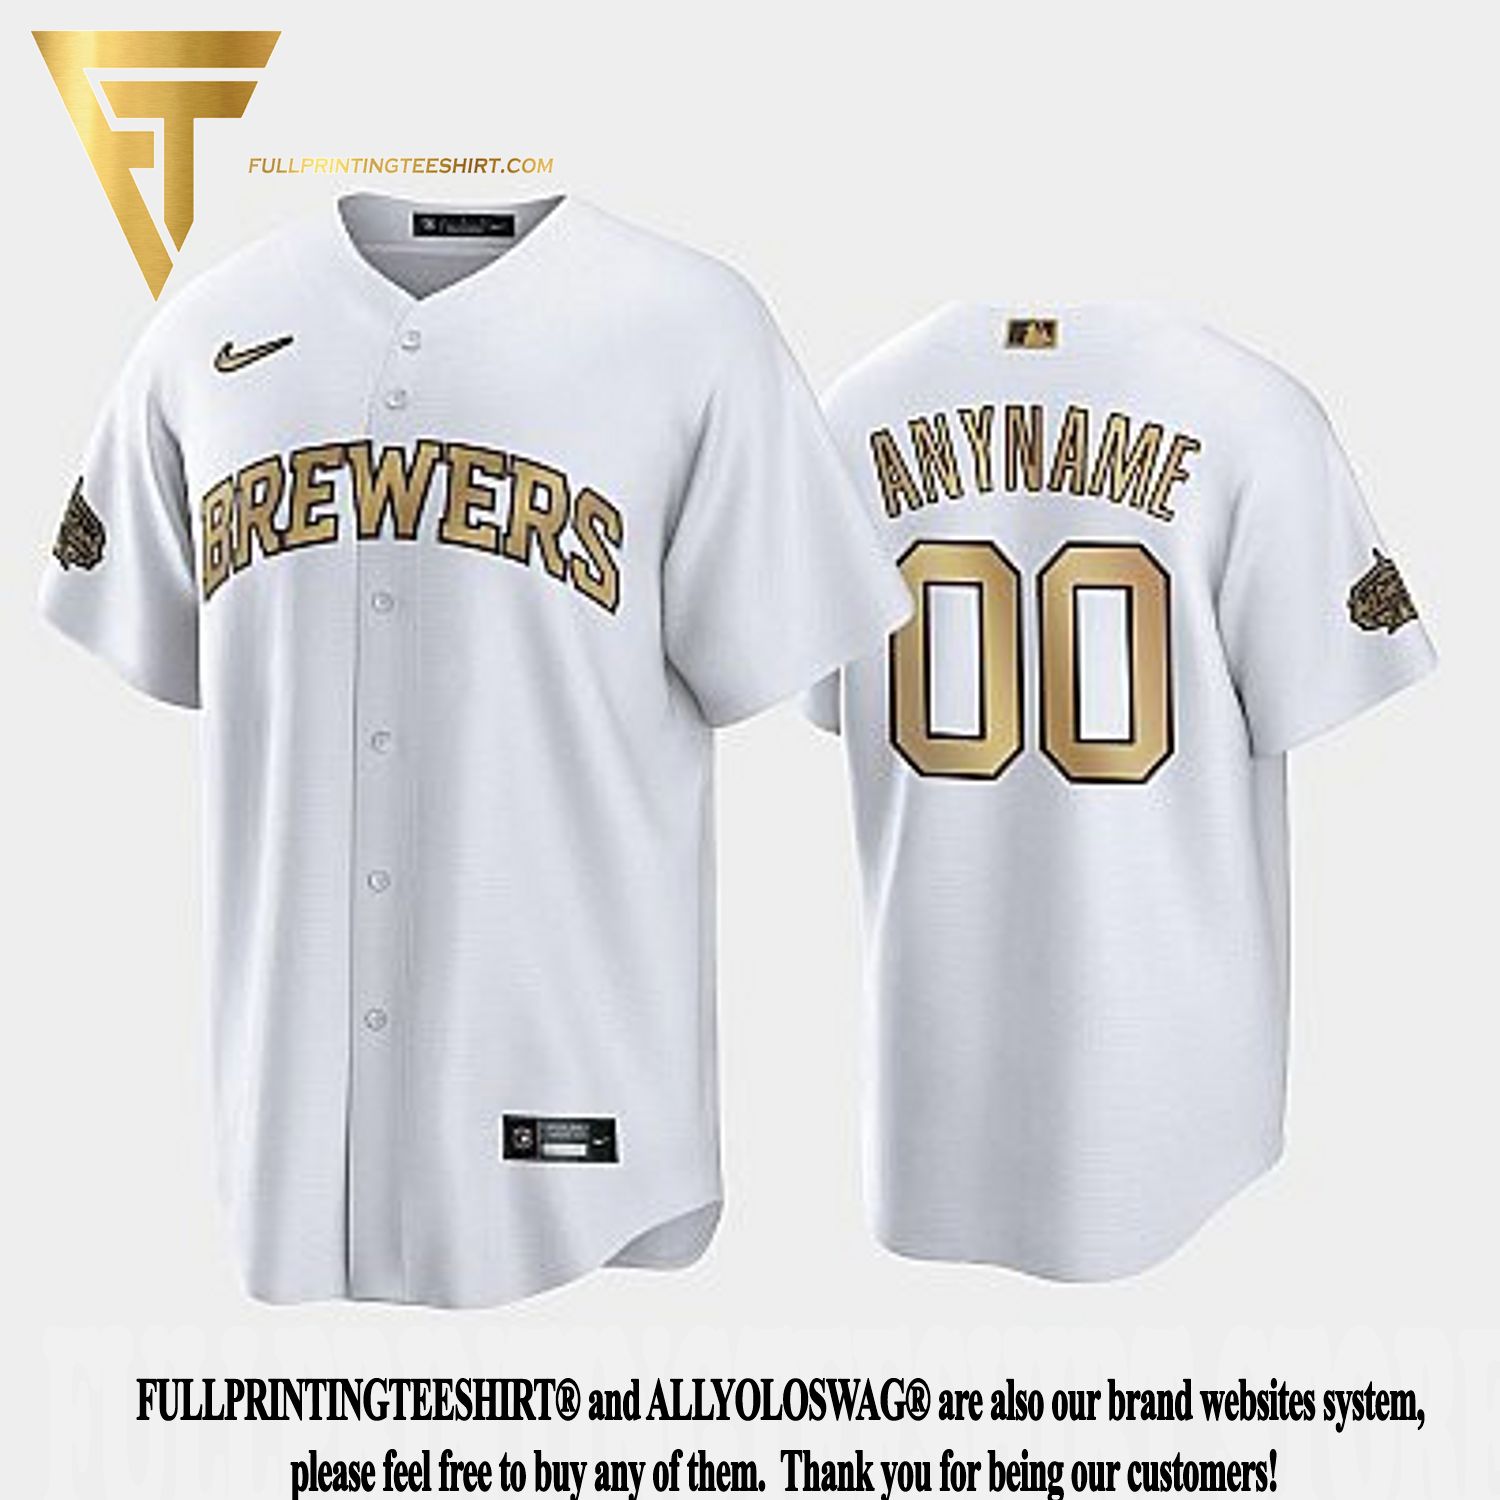 milwaukee brewers jersey numbers